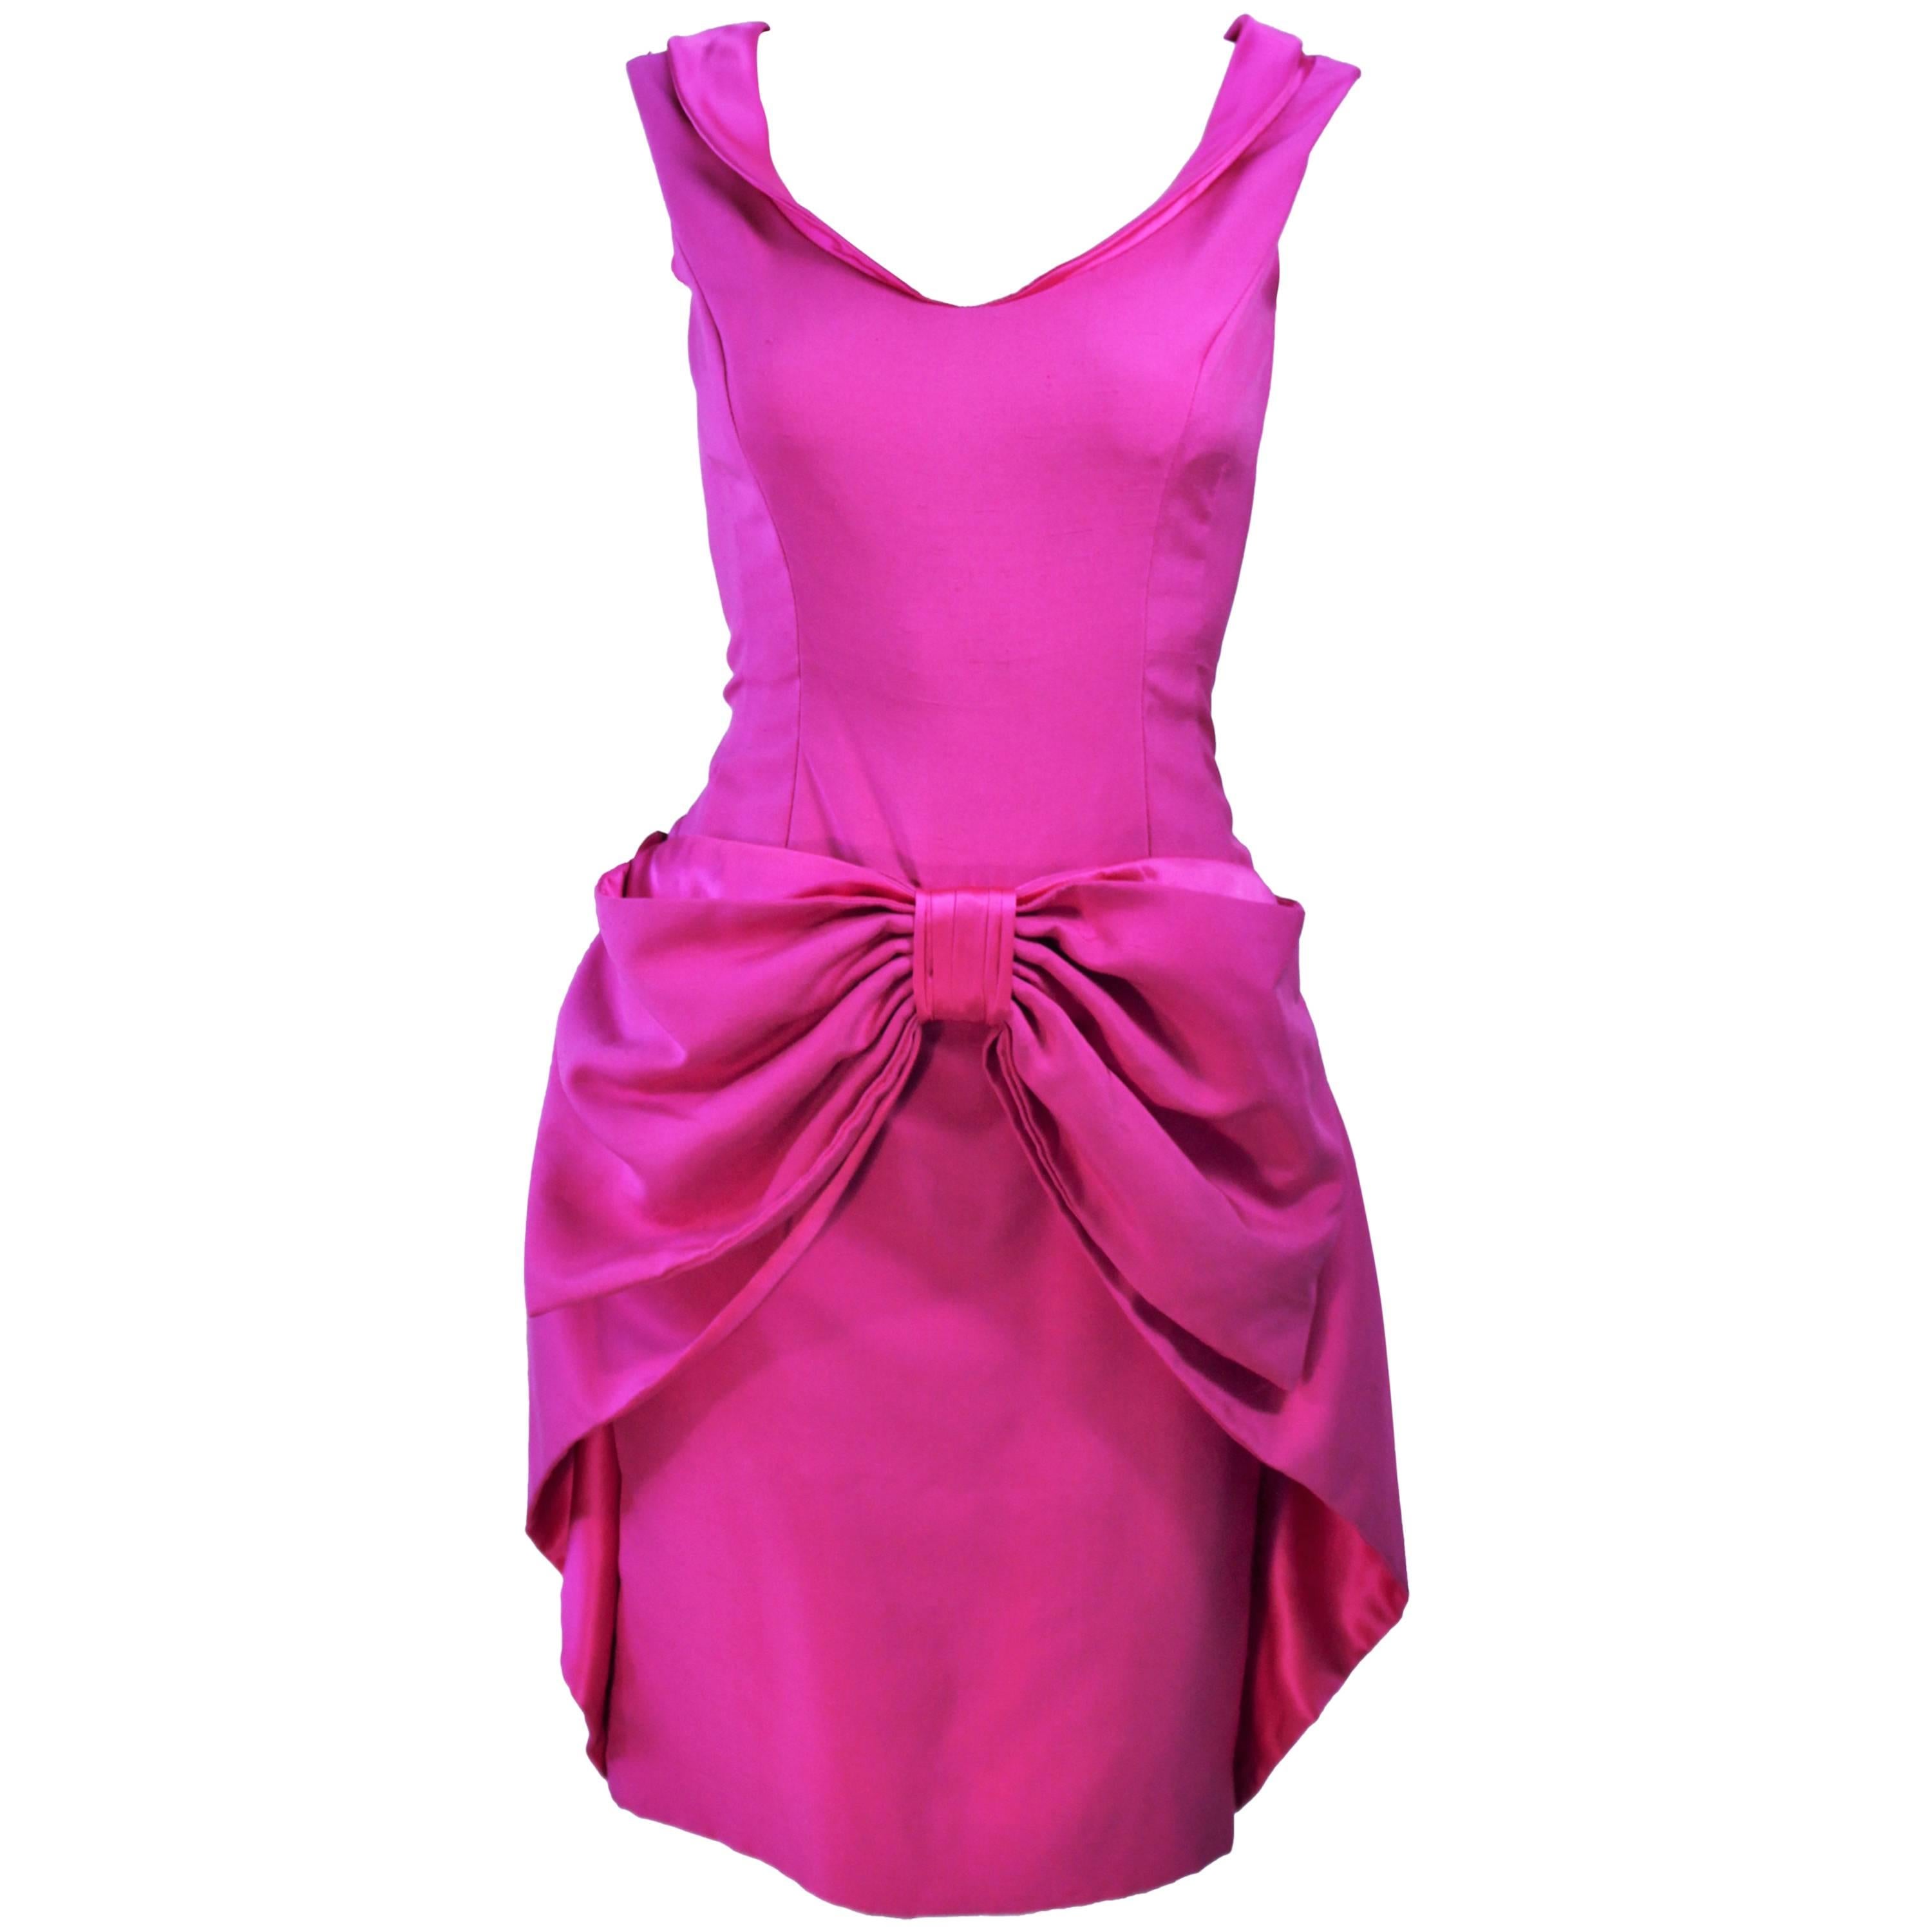 ELIZABETH MASON COUTURE Pink Magenta Bow Cocktail Dress Made to Order